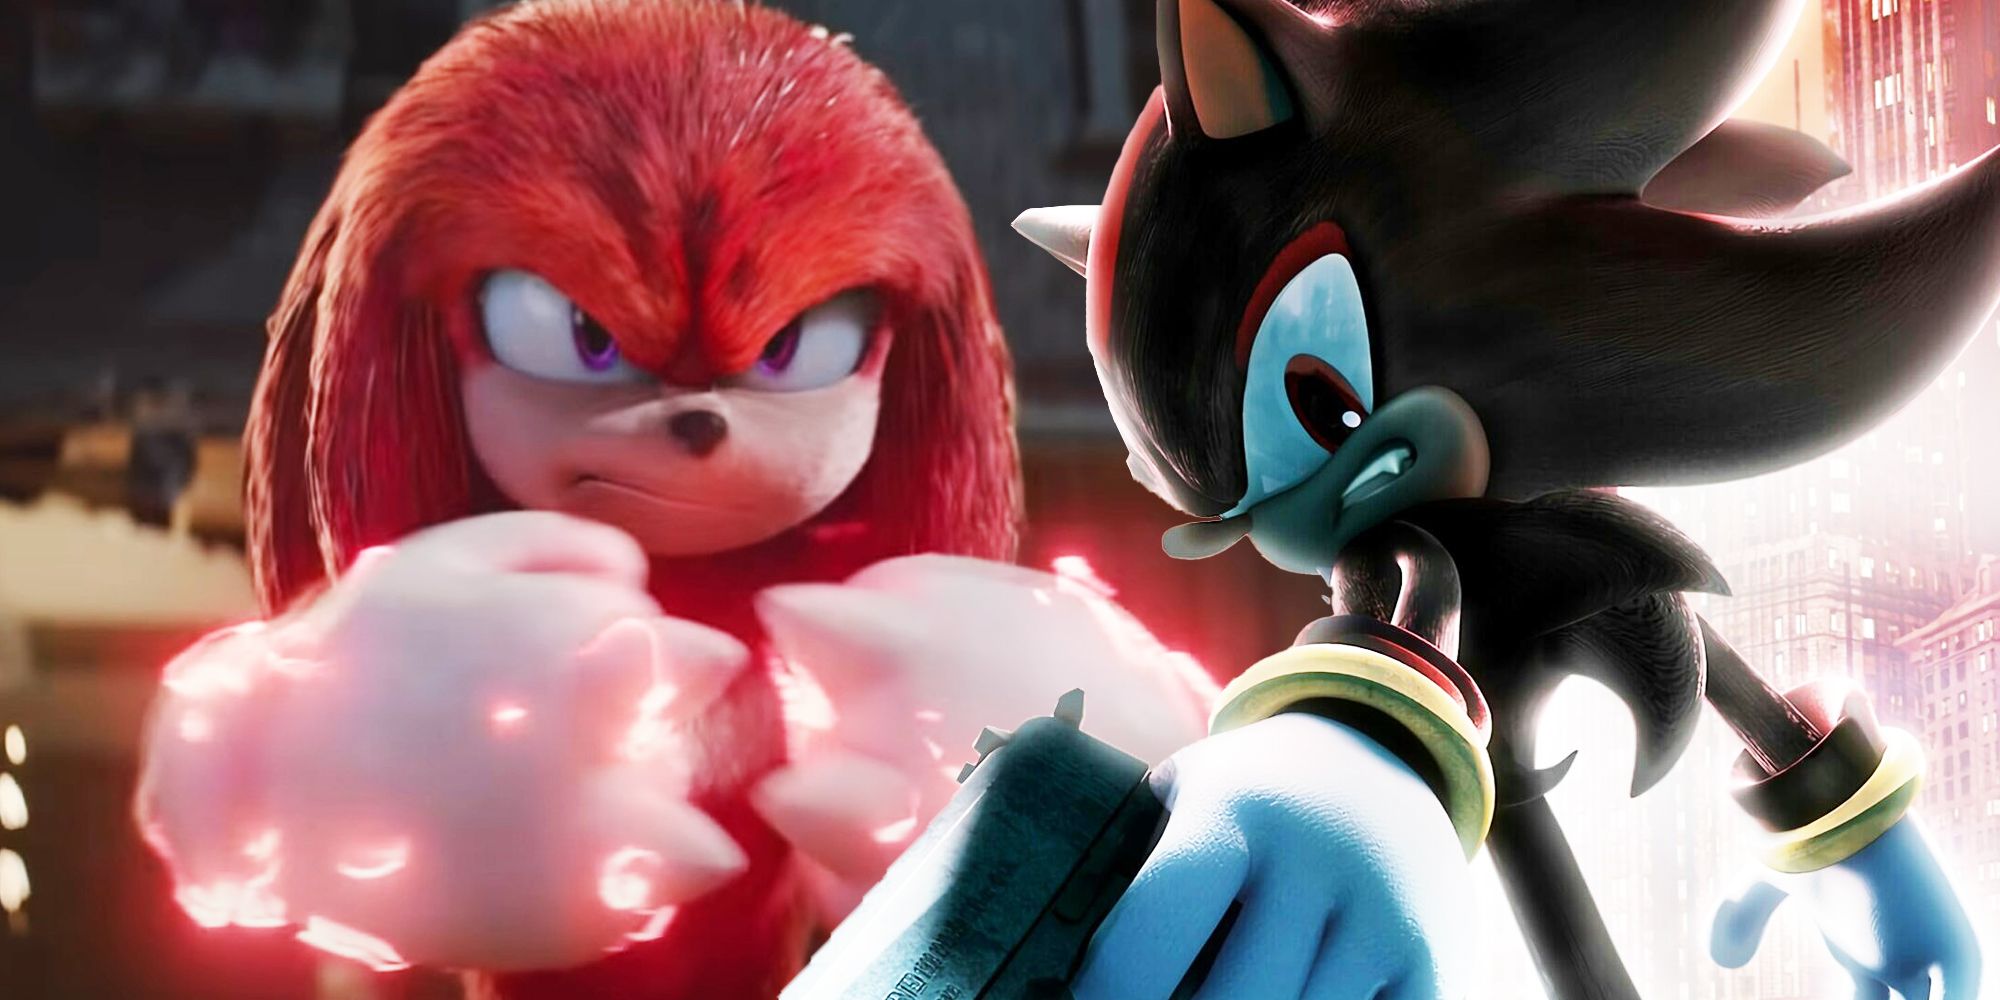 Shadow the Hedgehog and Knuckles.